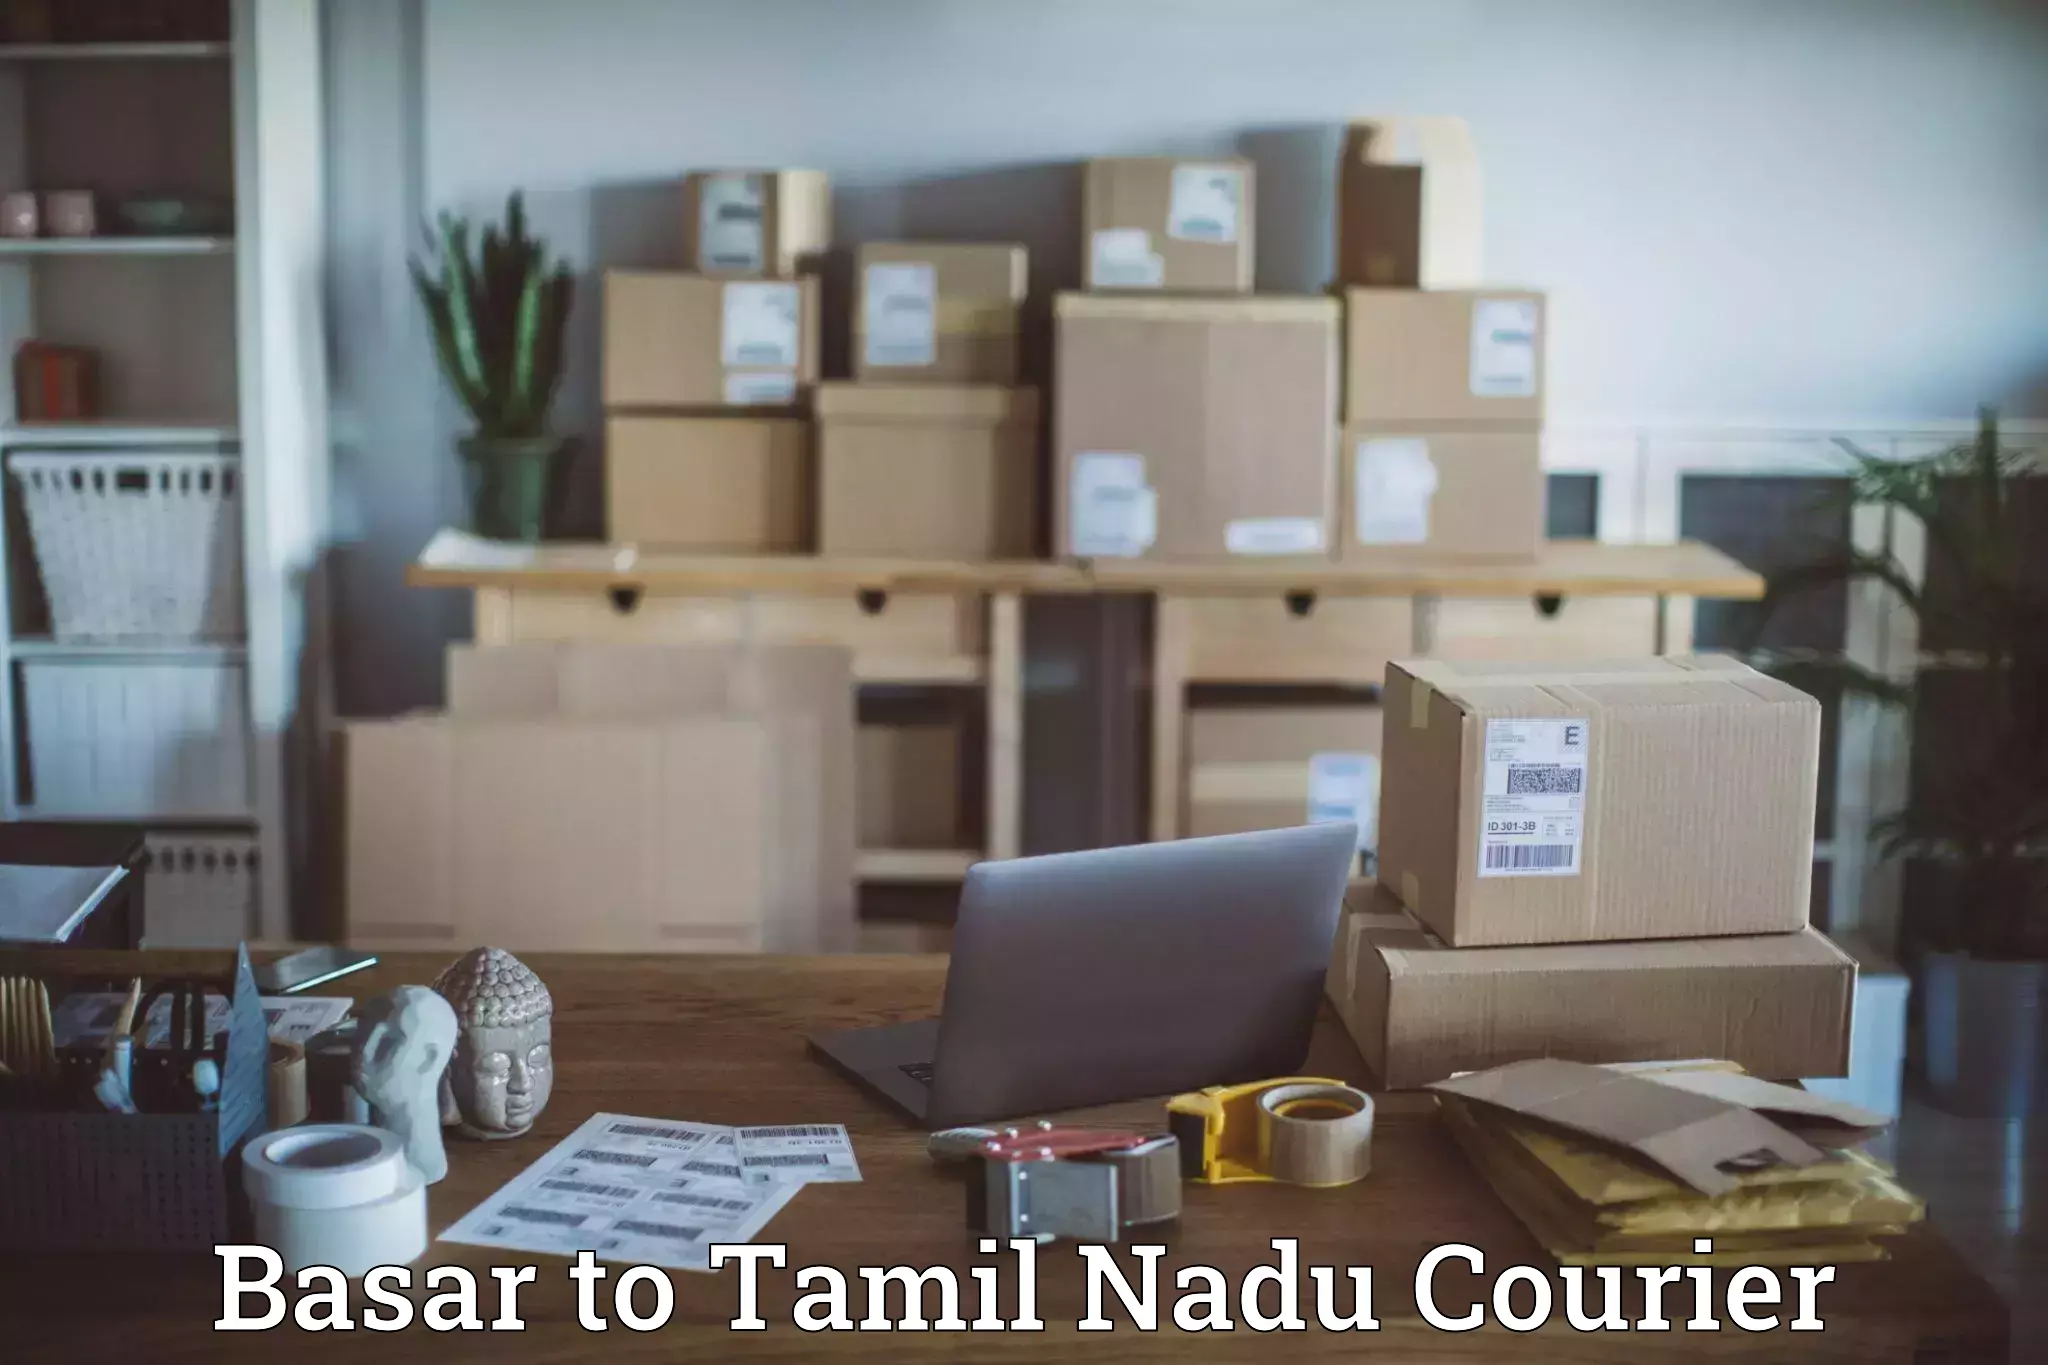 Full-service courier options in Basar to Tamil Nadu